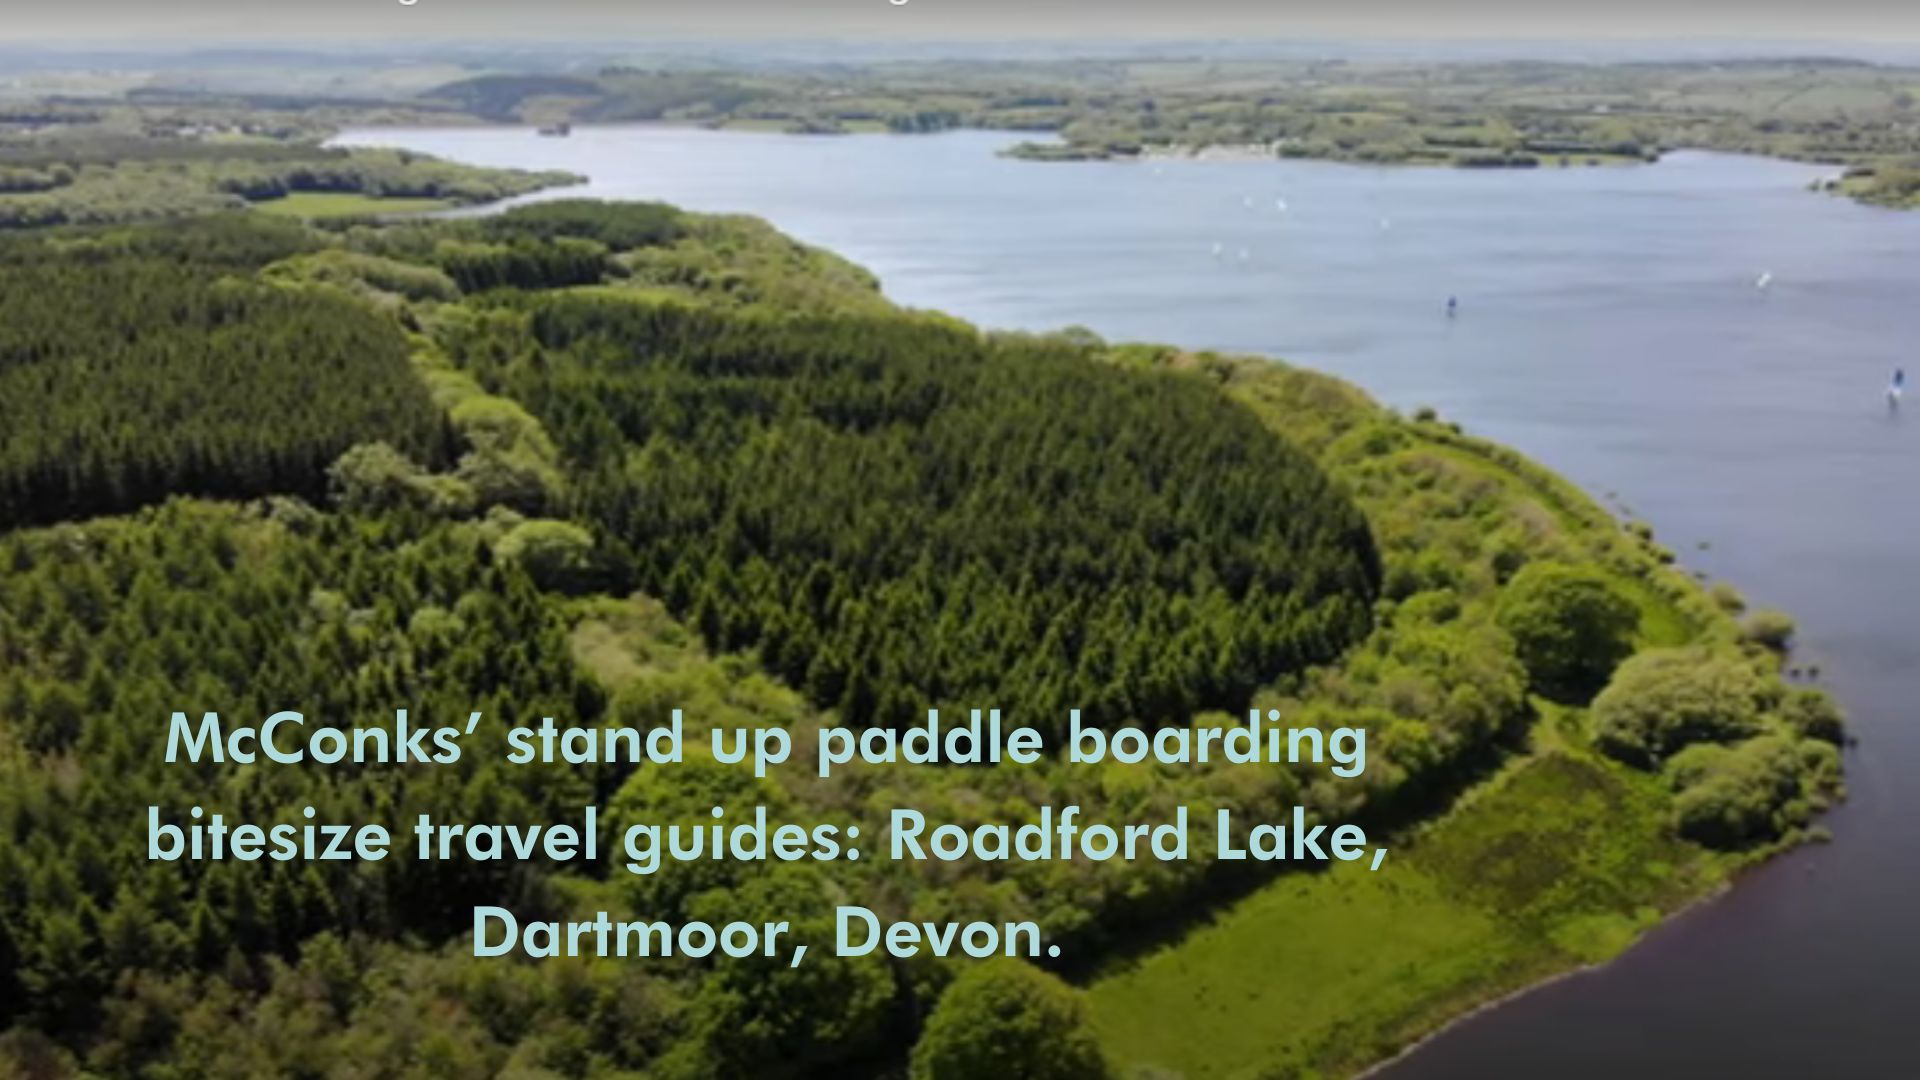 You are currently viewing McConks’ stand up paddle boarding bitesize travel guides: Roadford Lake, Dartmoor, Devon.